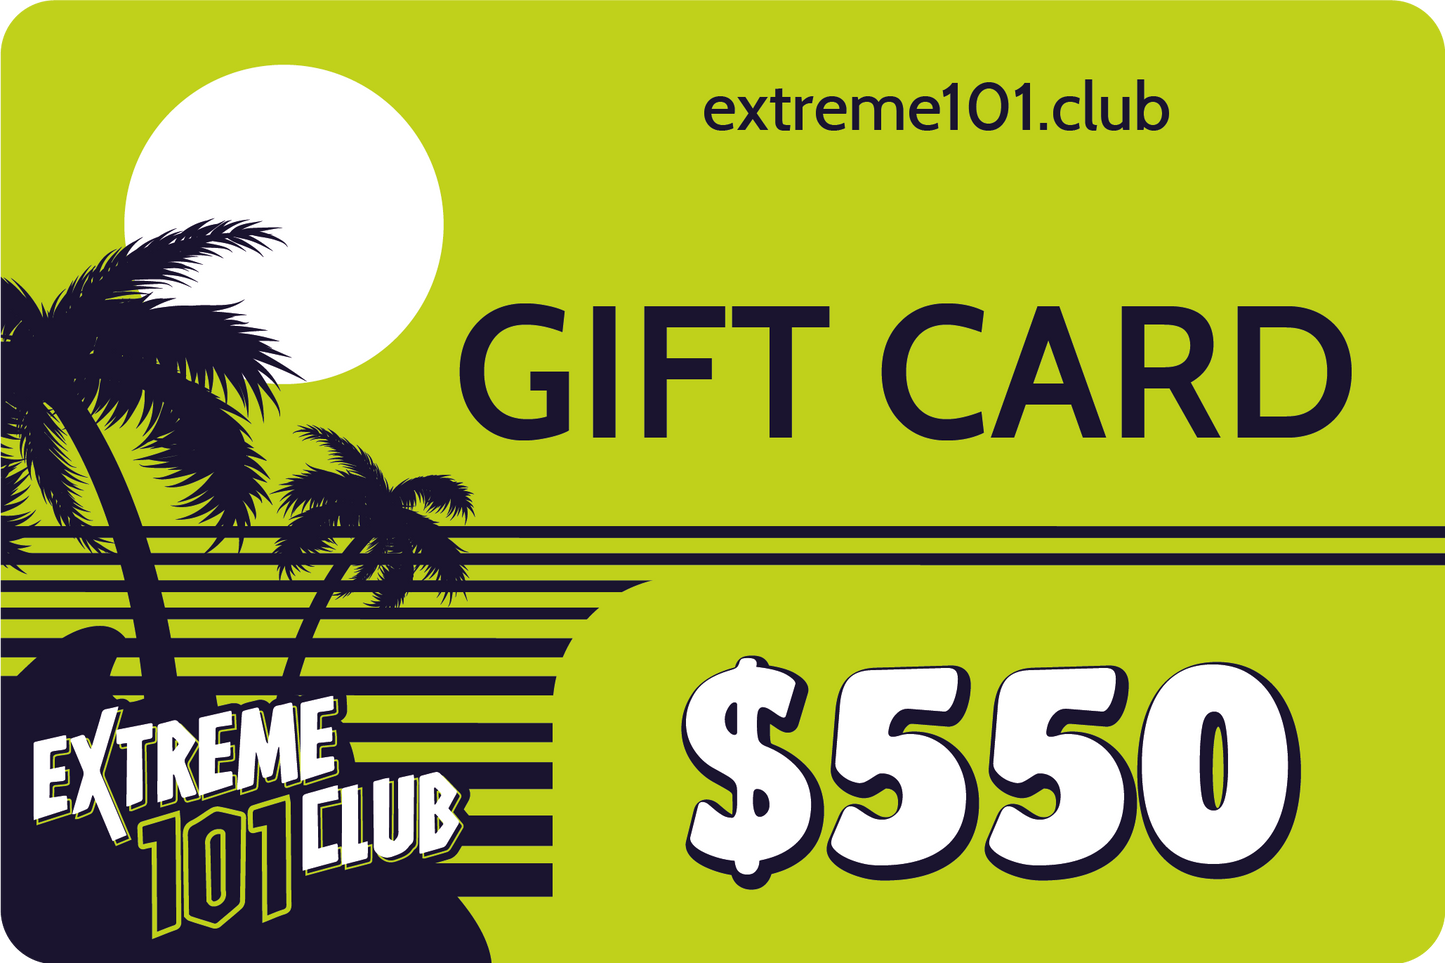 Treat your loved ones with a gift card from Extreme101club.